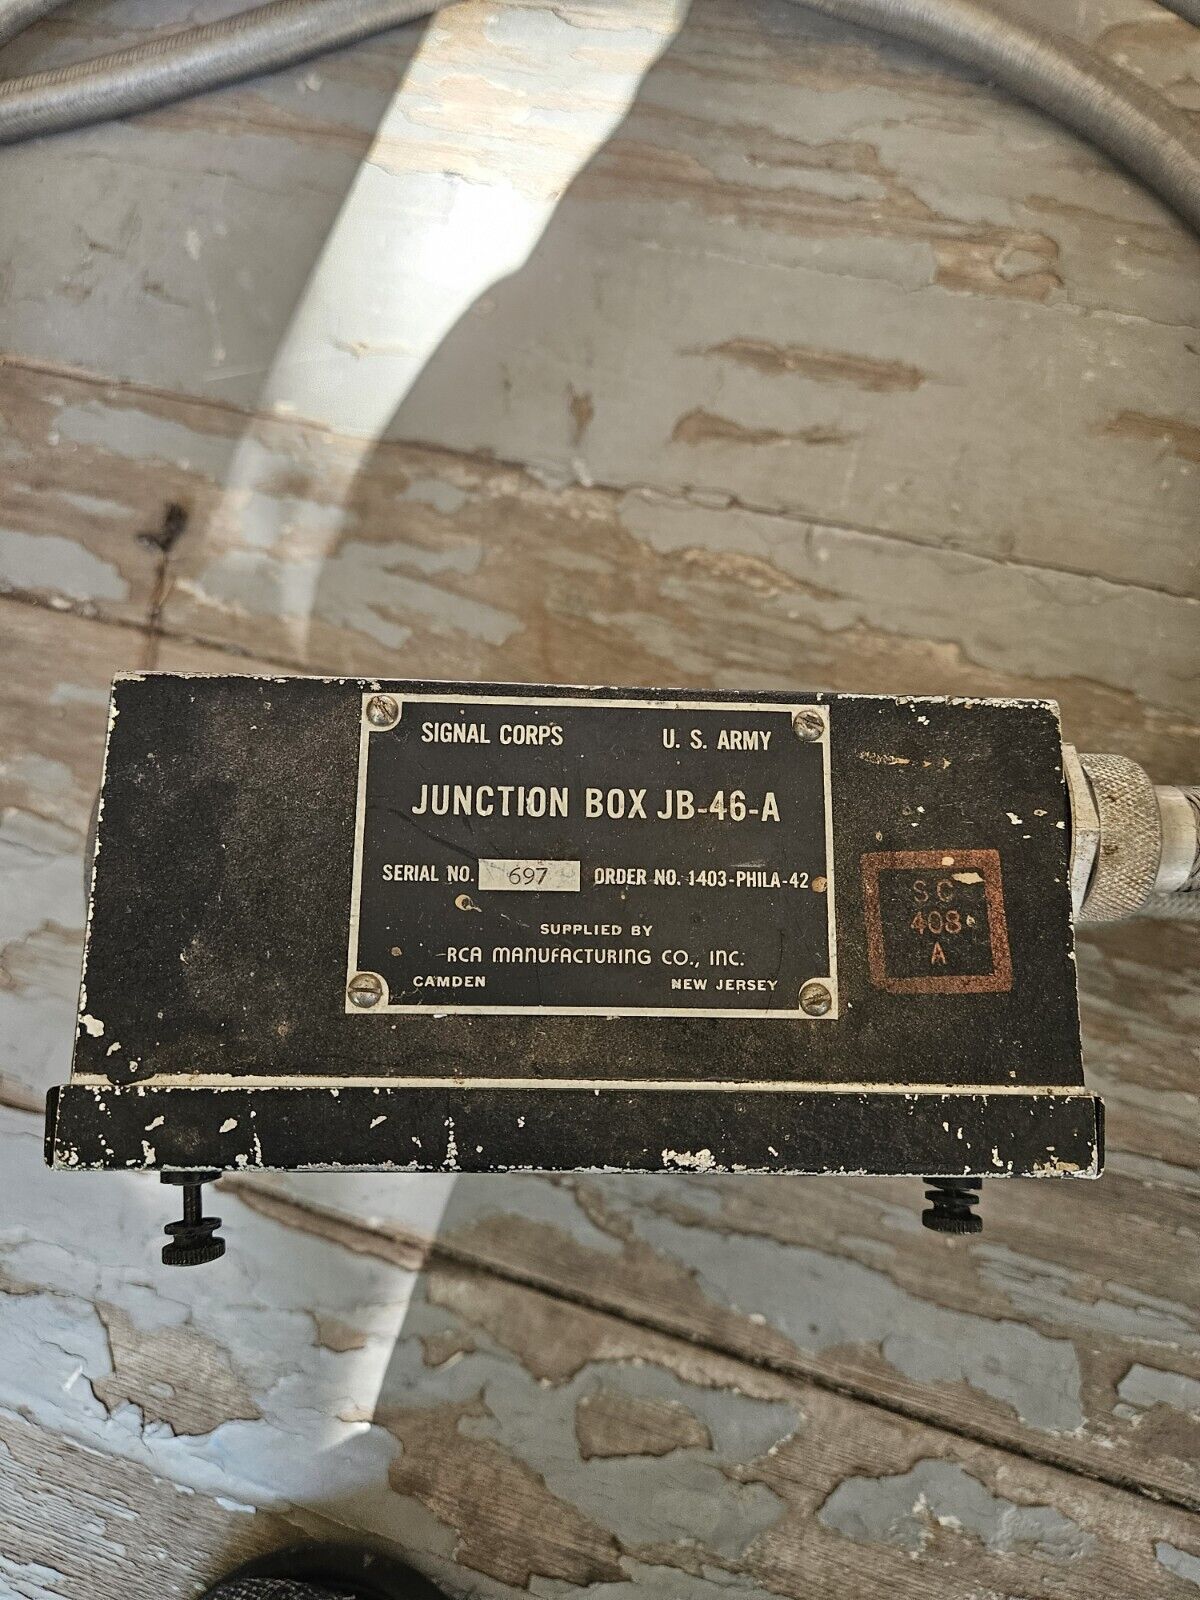 SUPER RARE WWII AIRCRAFT BOMBER JB-46-A JUNCTION BOX BC-688-A B-29 B-17 LOW S/N